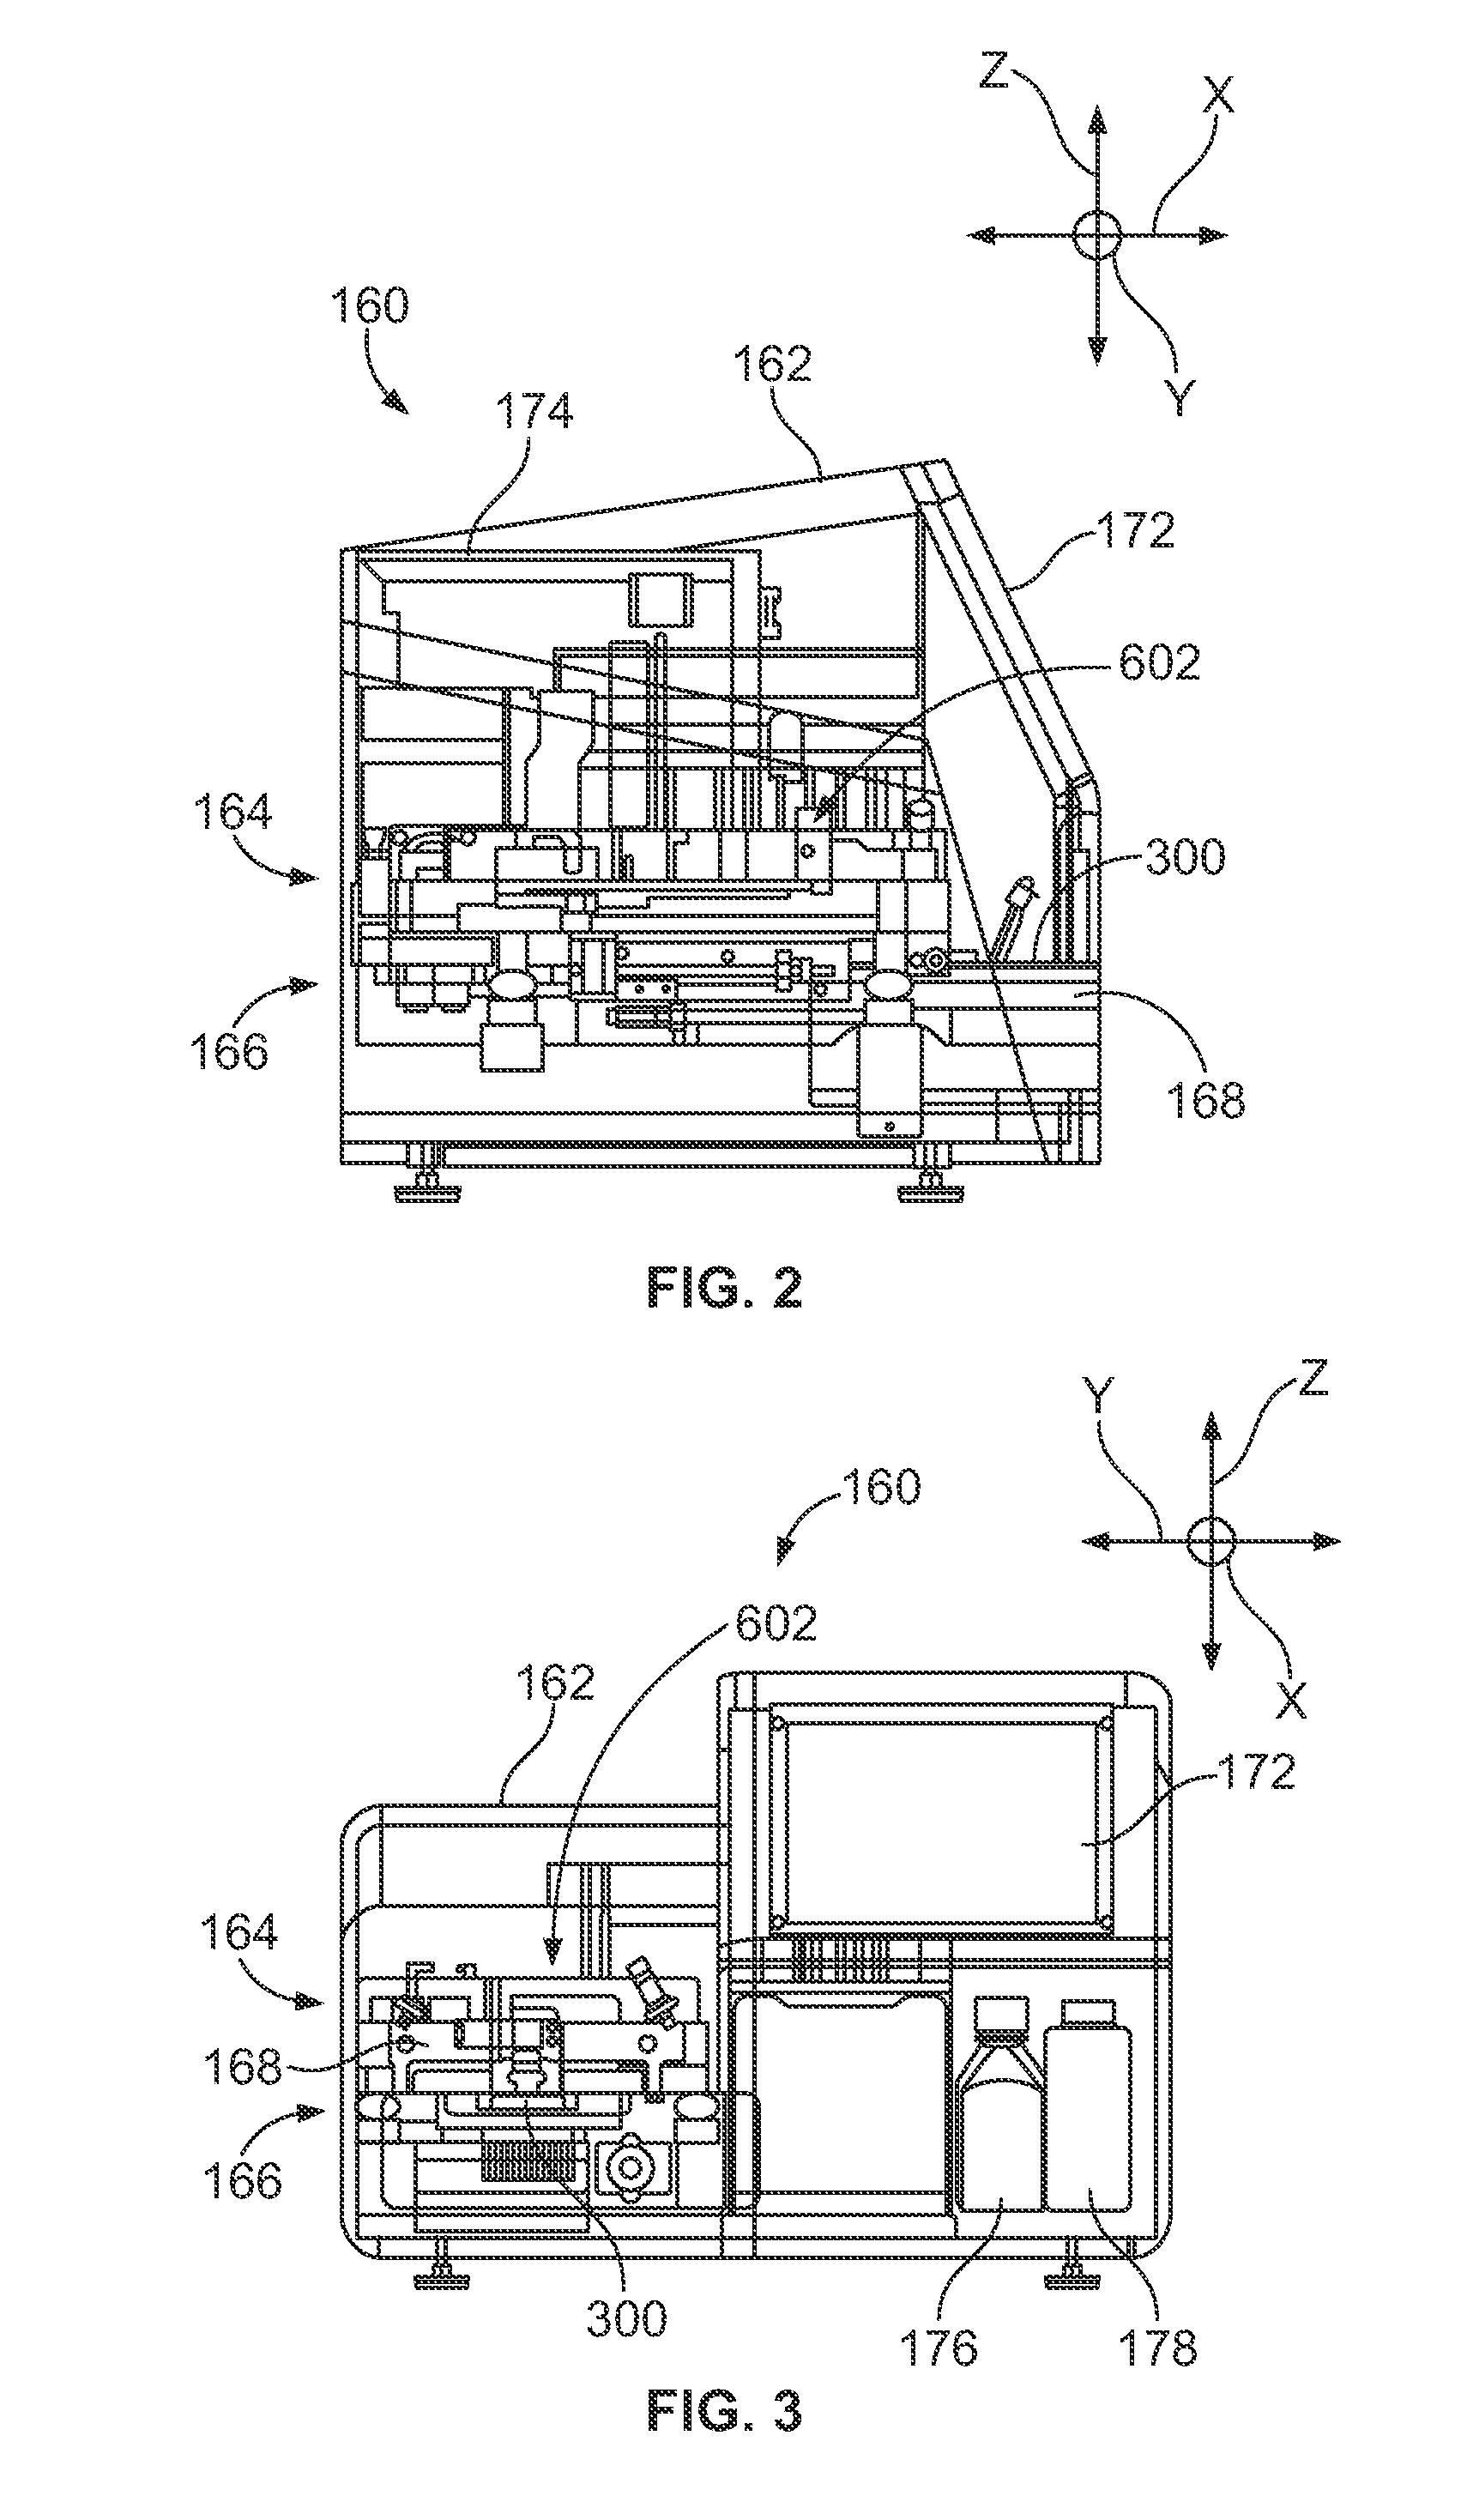 Systems, methods, and apparatuses to image a sample for biological or chemical analysis